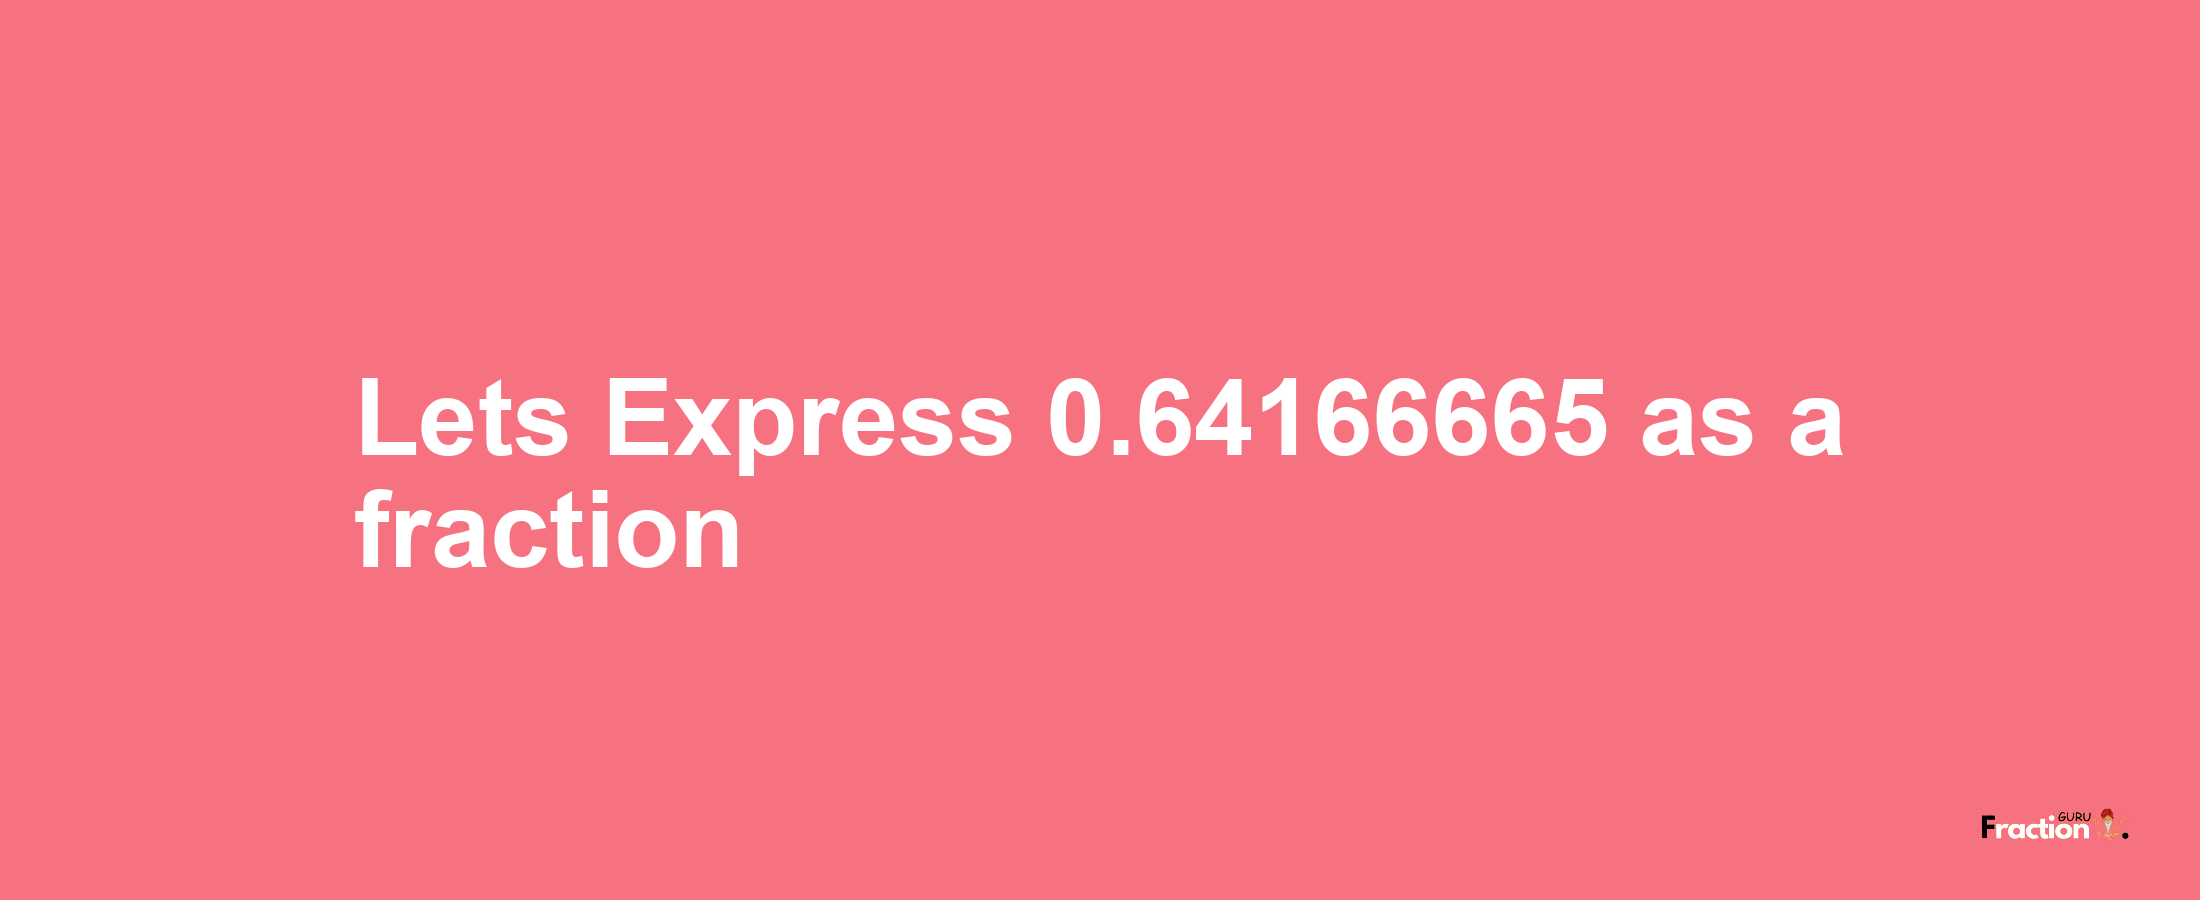 Lets Express 0.64166665 as afraction